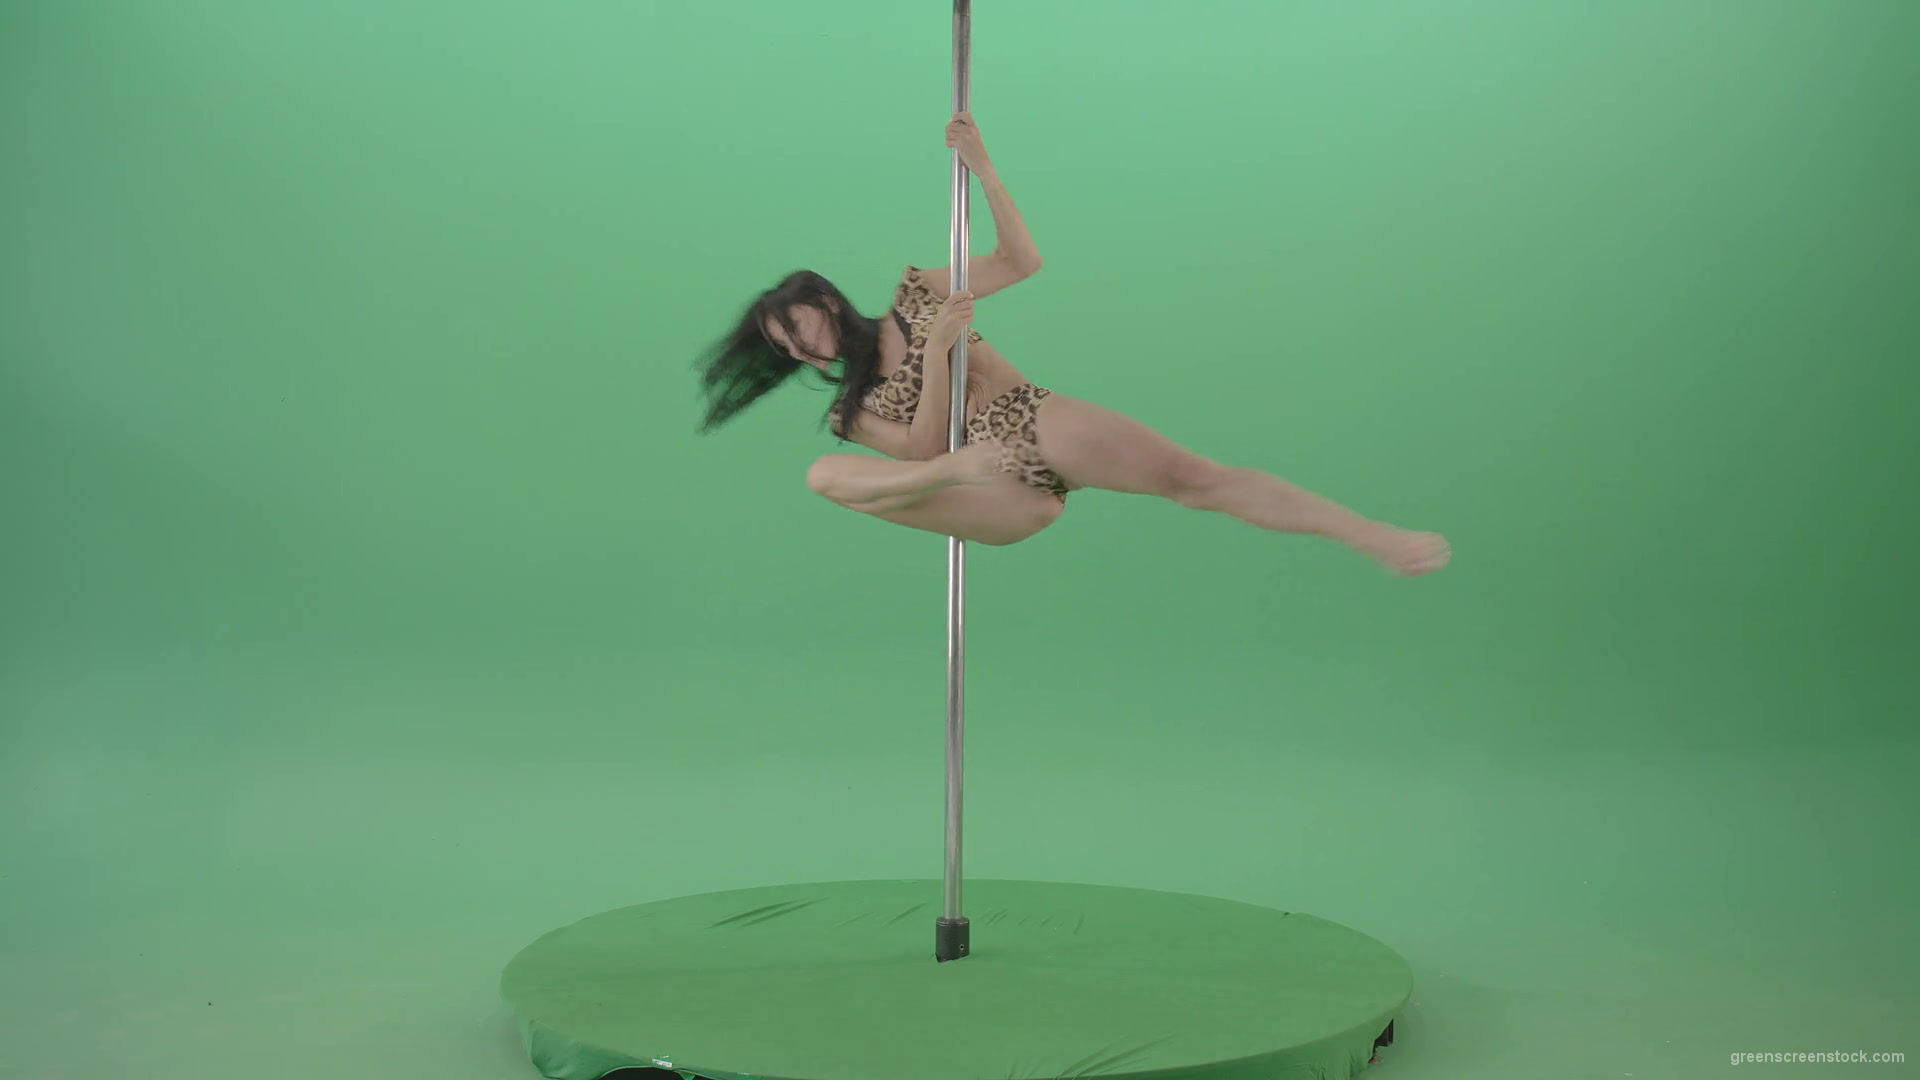 Gymnast-Girl-in-leopard-animal-underwear-spinning-fast-in-pole-dance-isolated-on-Green-Screen-4K-Video-Footage-1920_004 Green Screen Stock